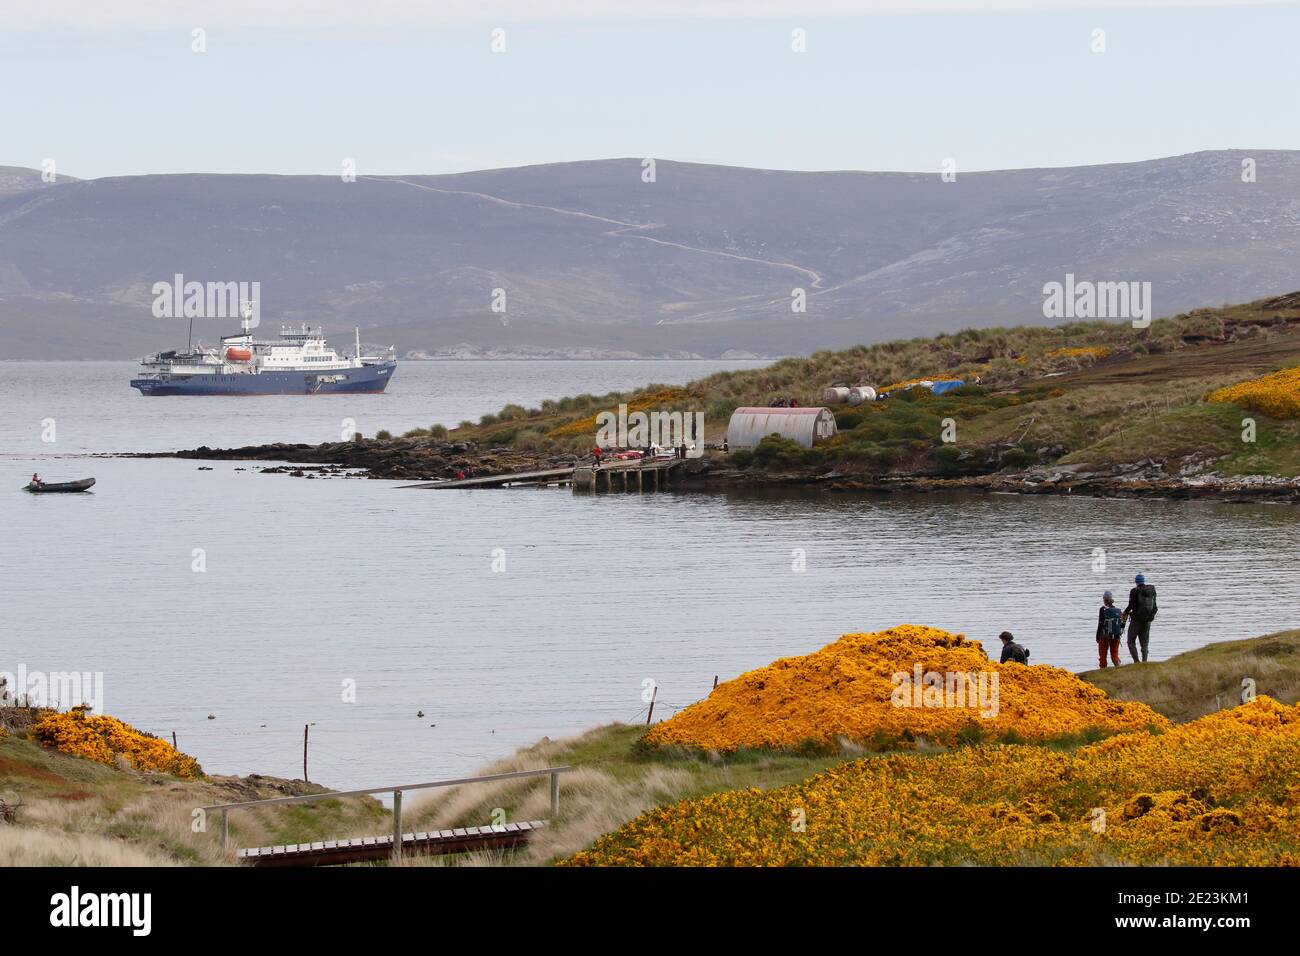 Tourists return to cruise ship (Plancius) after excursion on Carcass Island, Falkland Islands 3rd Dec 2015 Stock Photo